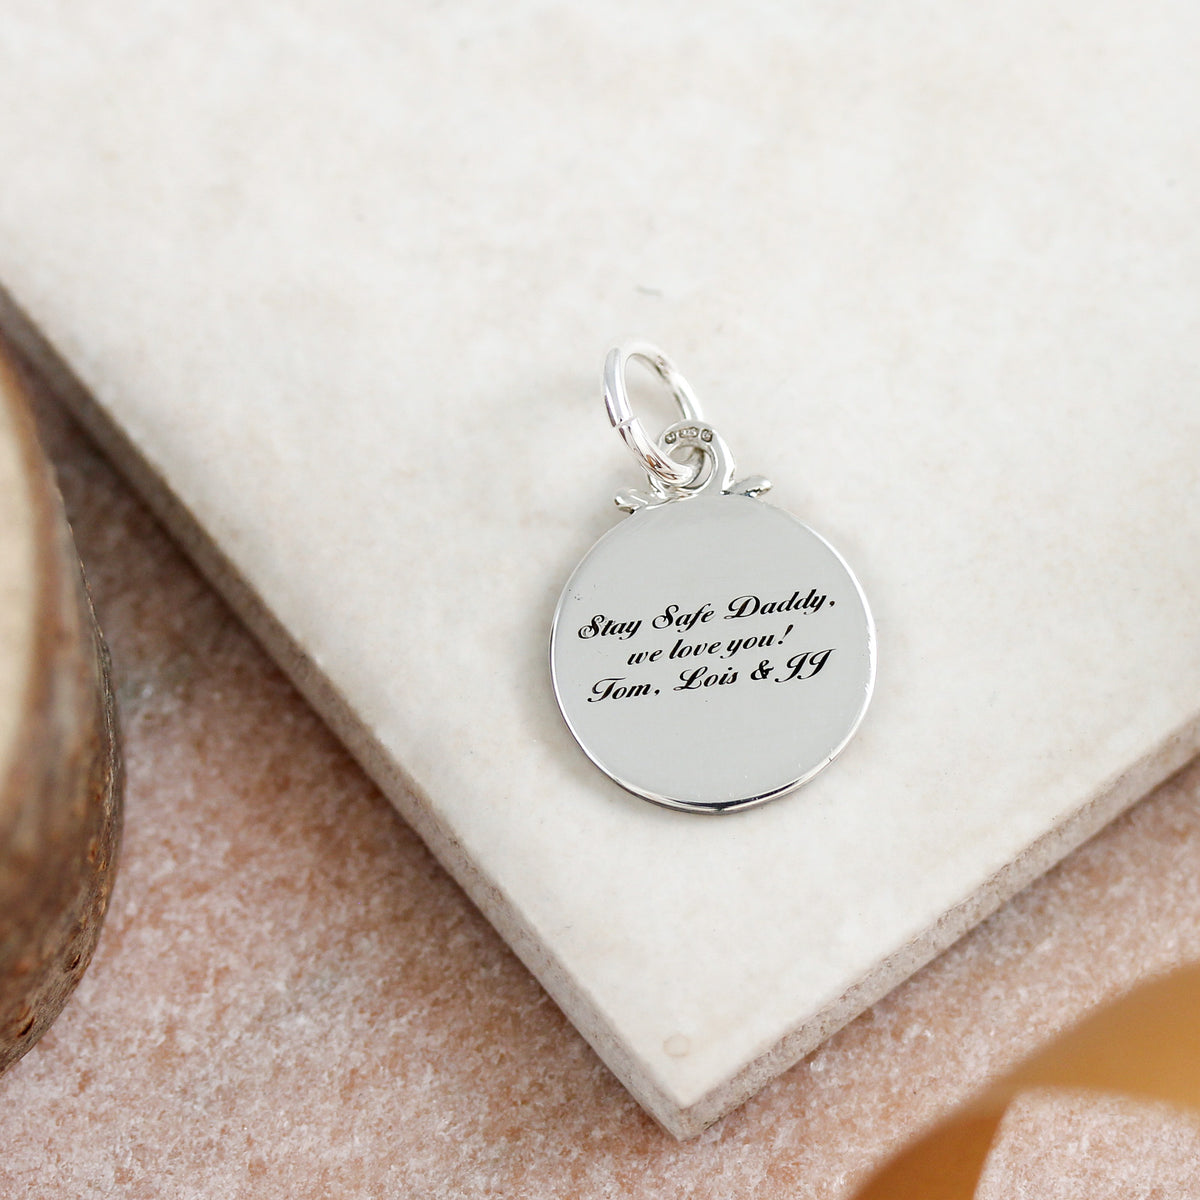 Travel Safe Compass Personalised Silver Charm